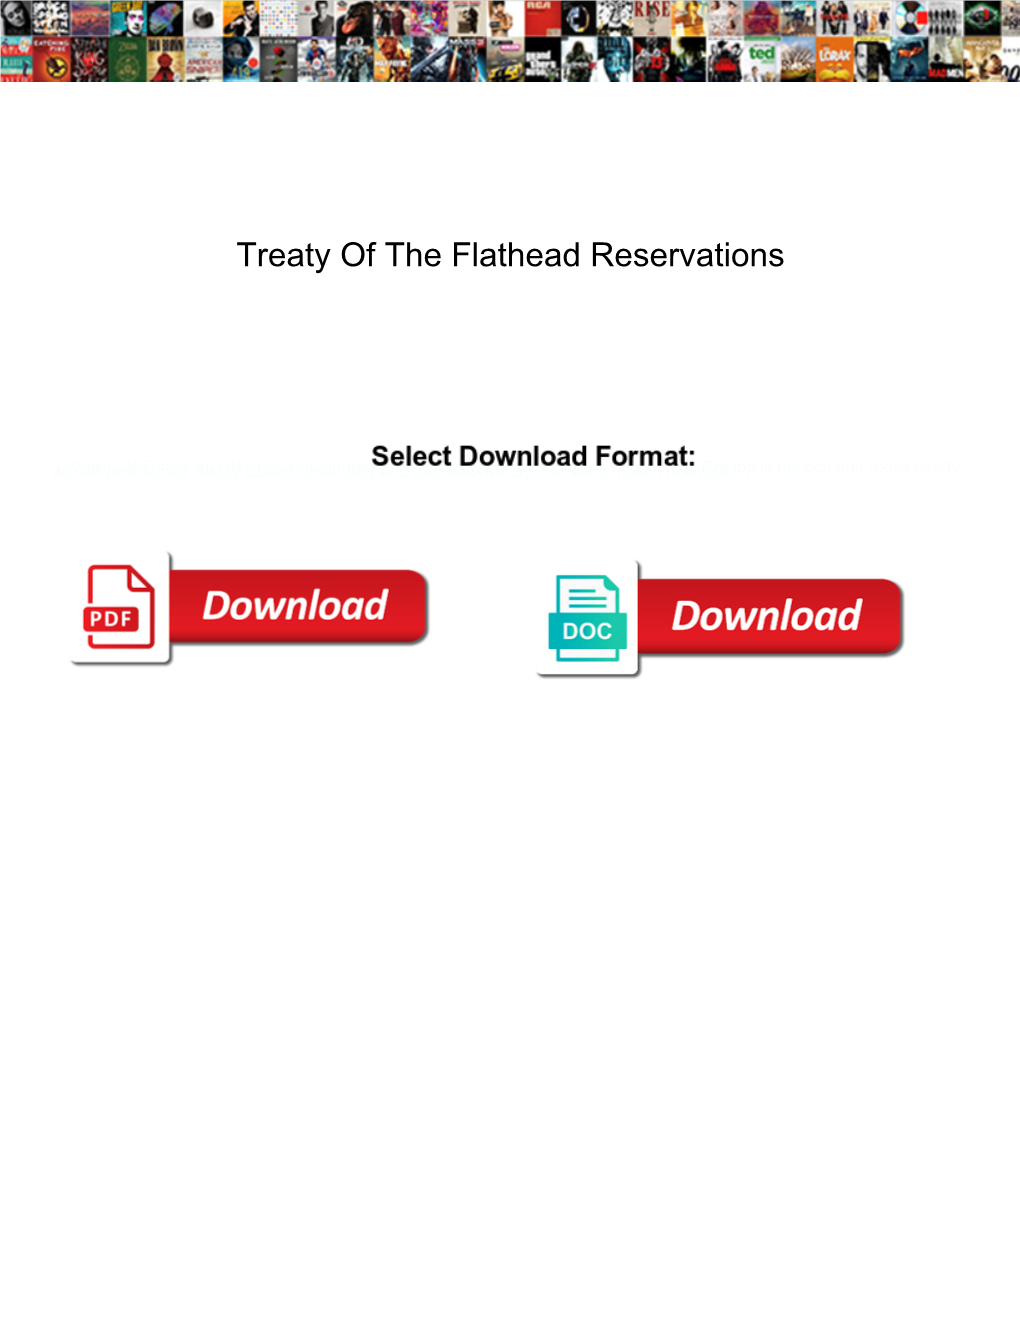 Treaty of the Flathead Reservations